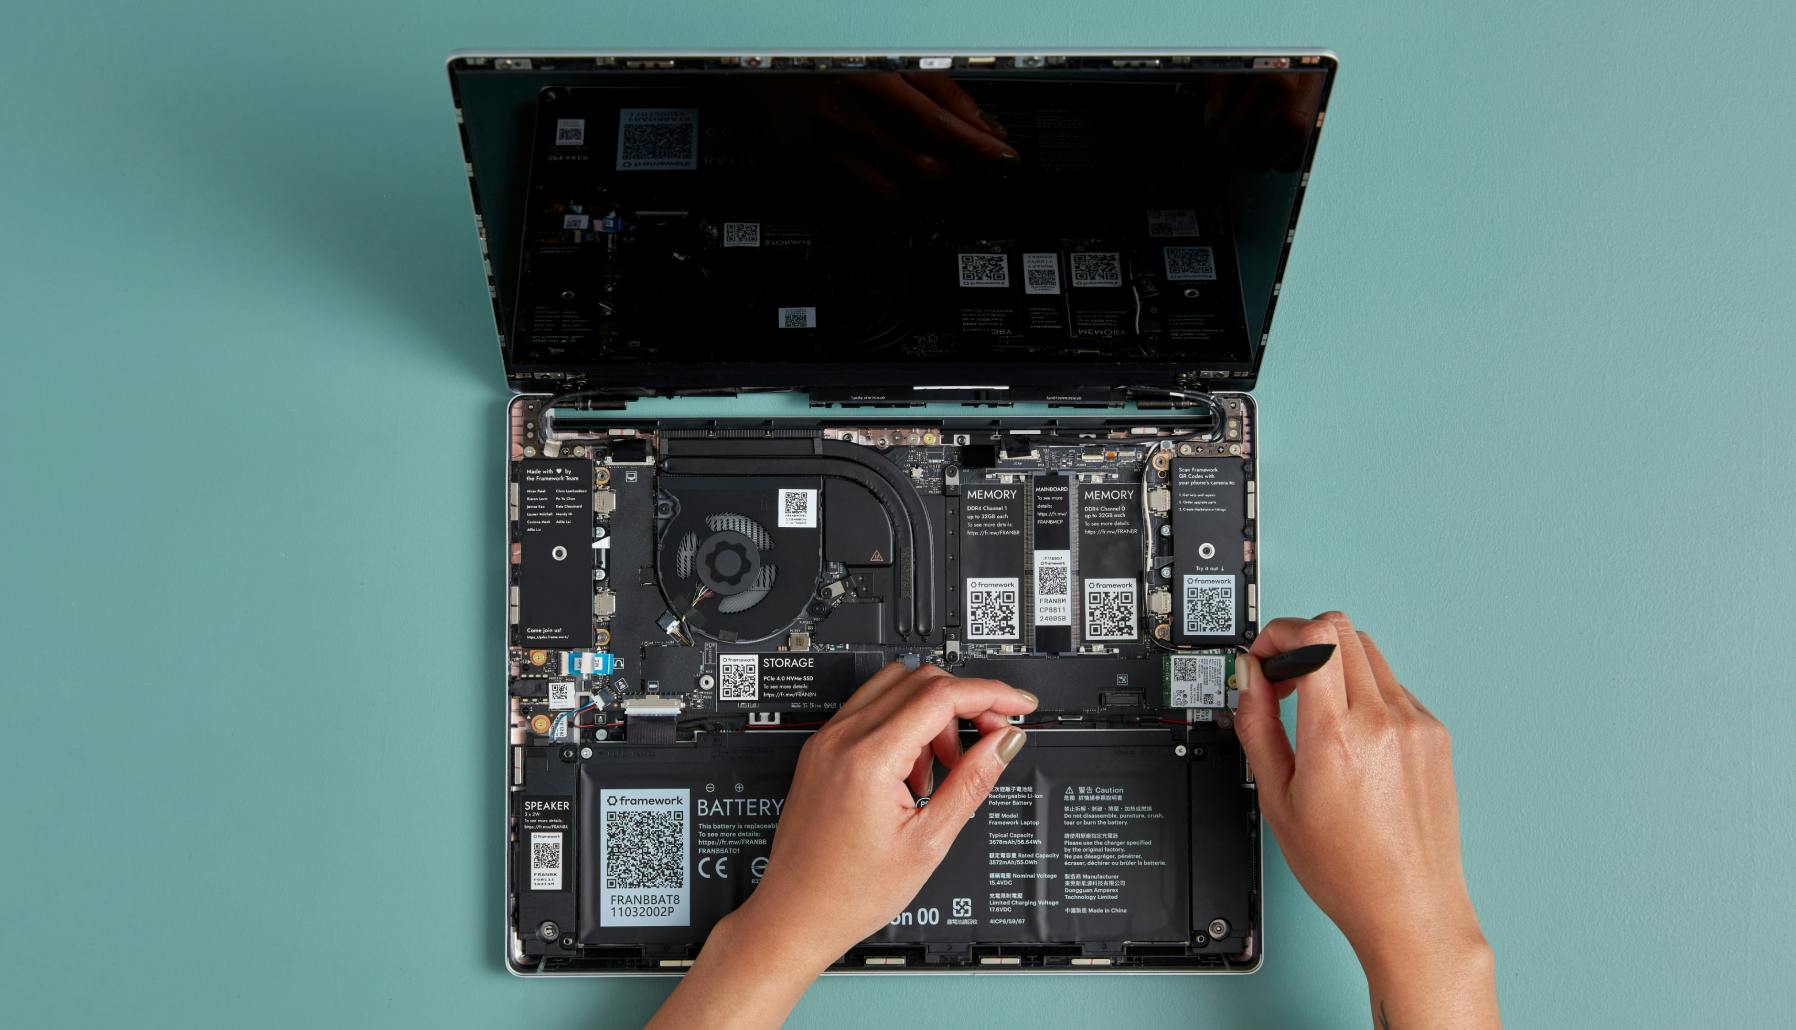 Topdown view of Laptop internals with someone removing the WiFi module